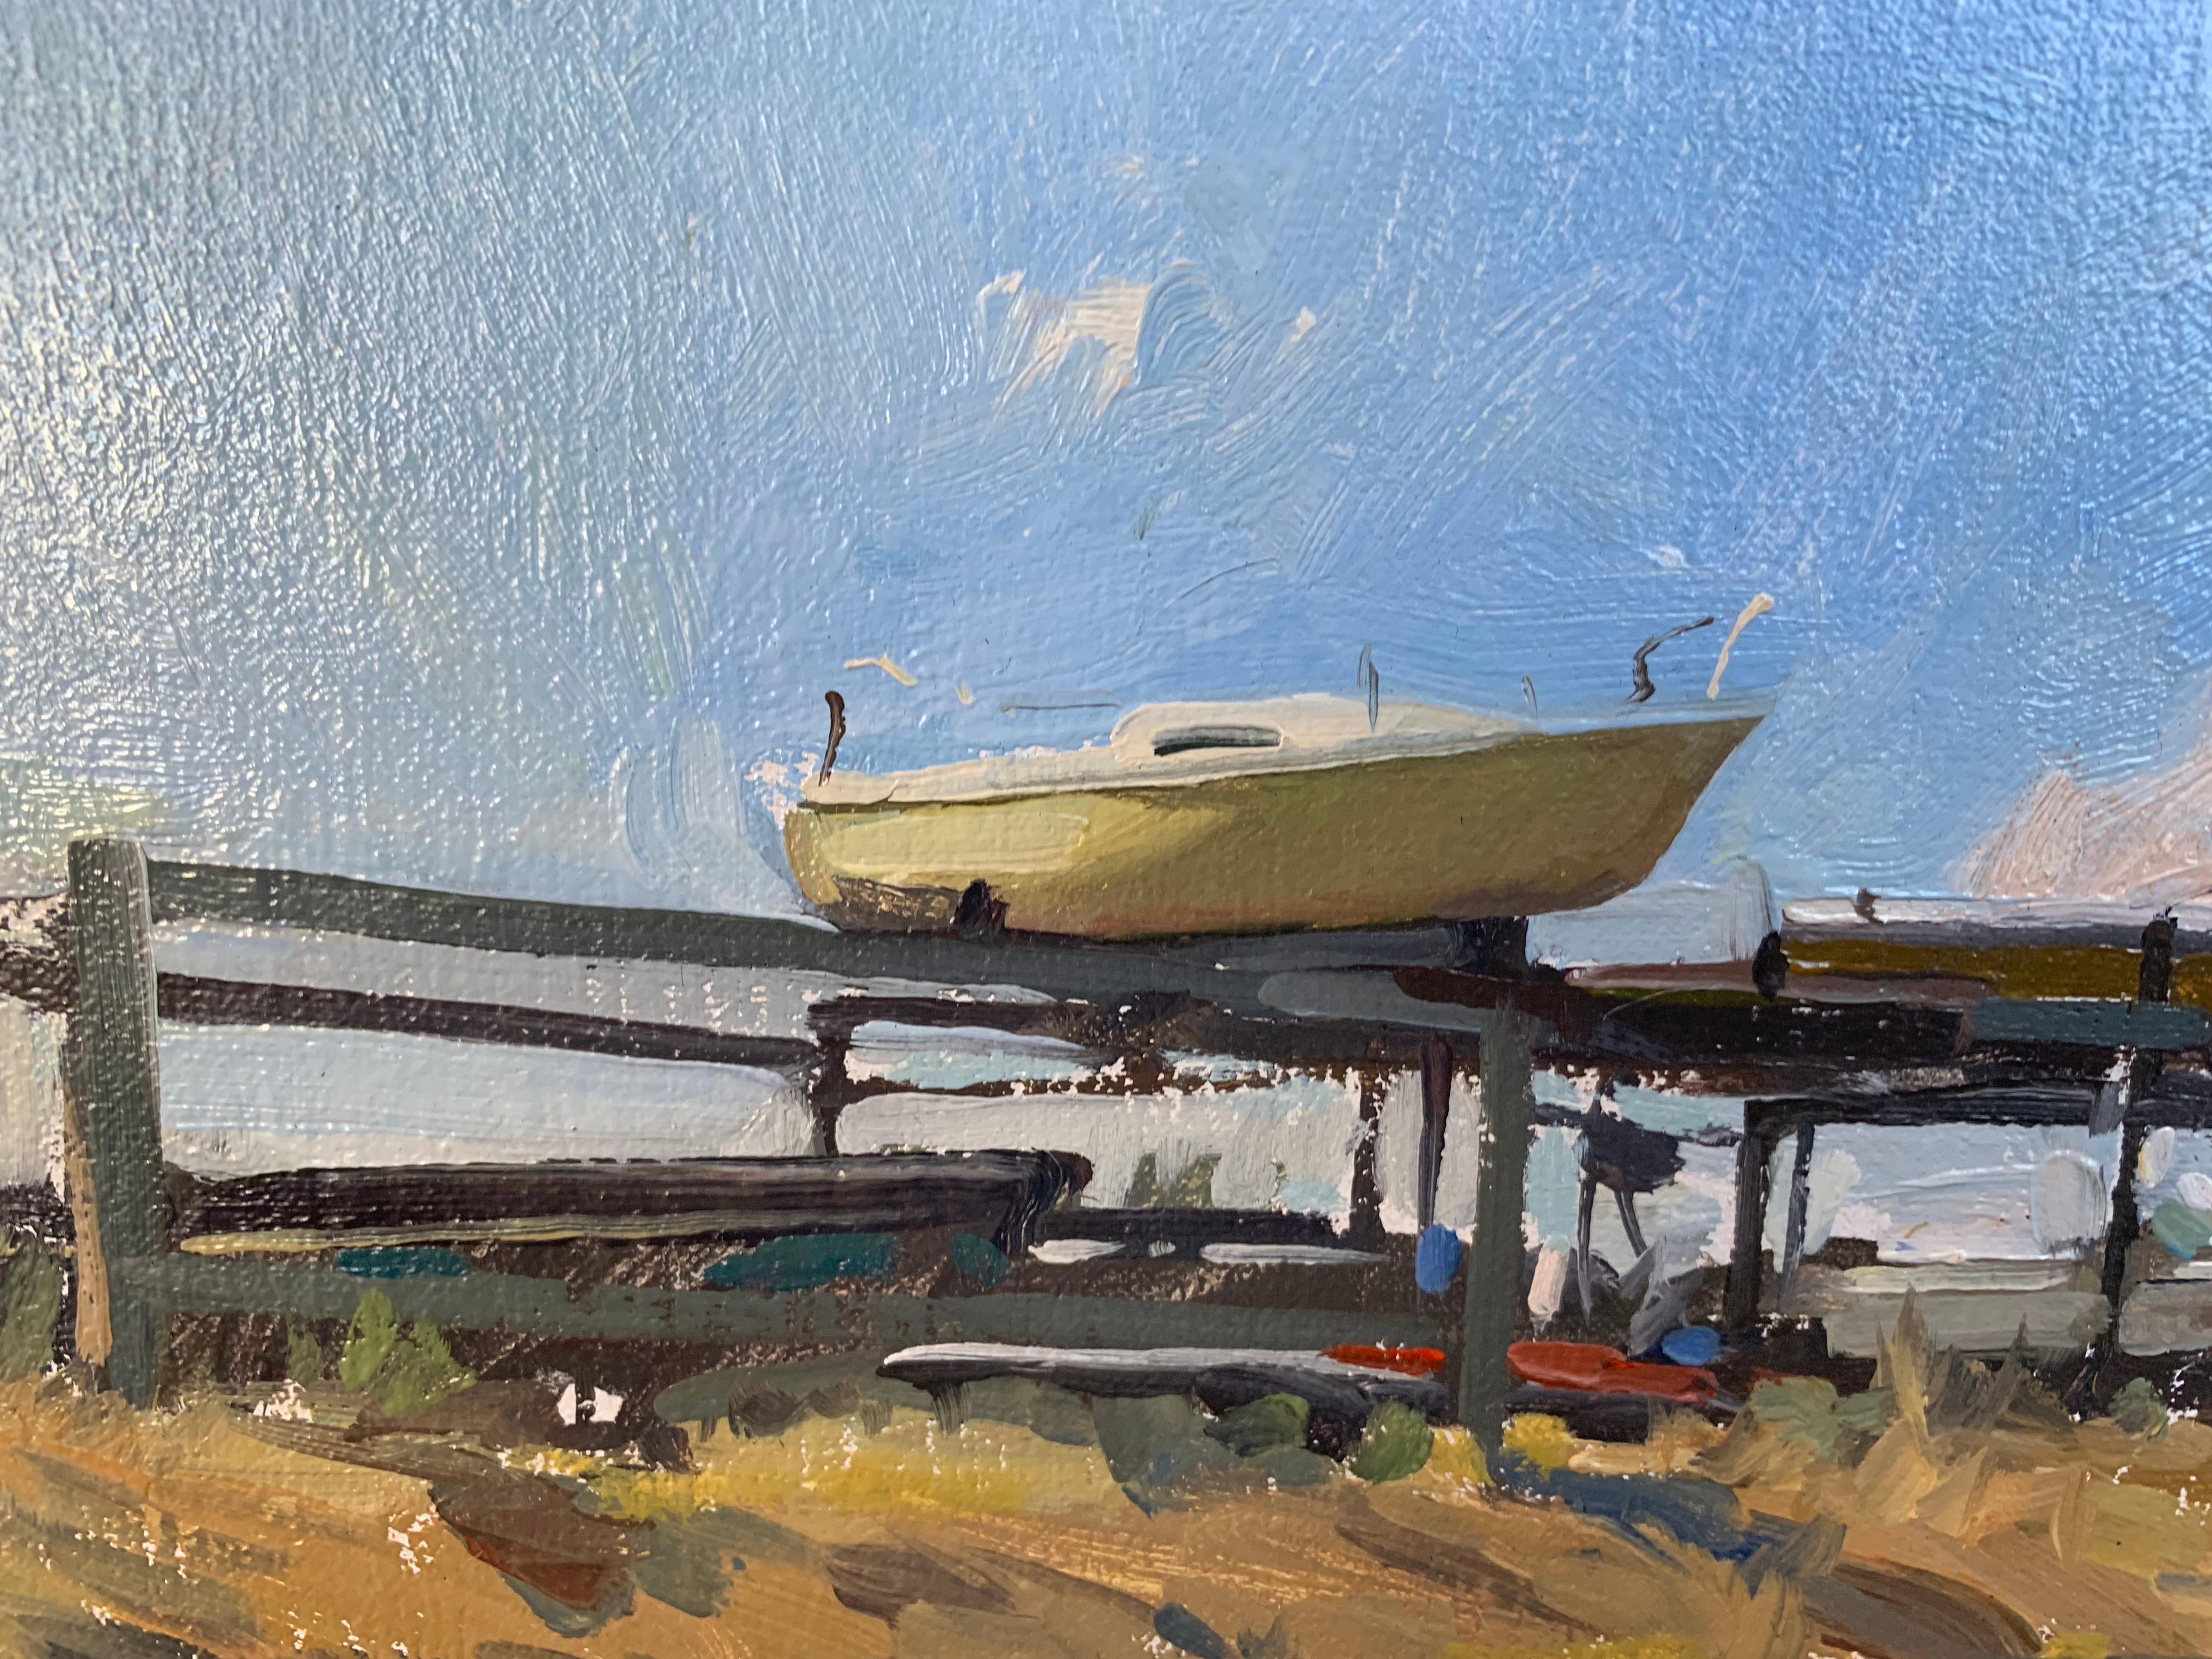 Painted en plein air, at Lake Tahoe in California. Boats rest on top of racks while out of the water.

Marc Dalessio was born in 1972 in Los Angeles, California. Even in his earliest years, it was evident that his passion was art. In 1989 he started